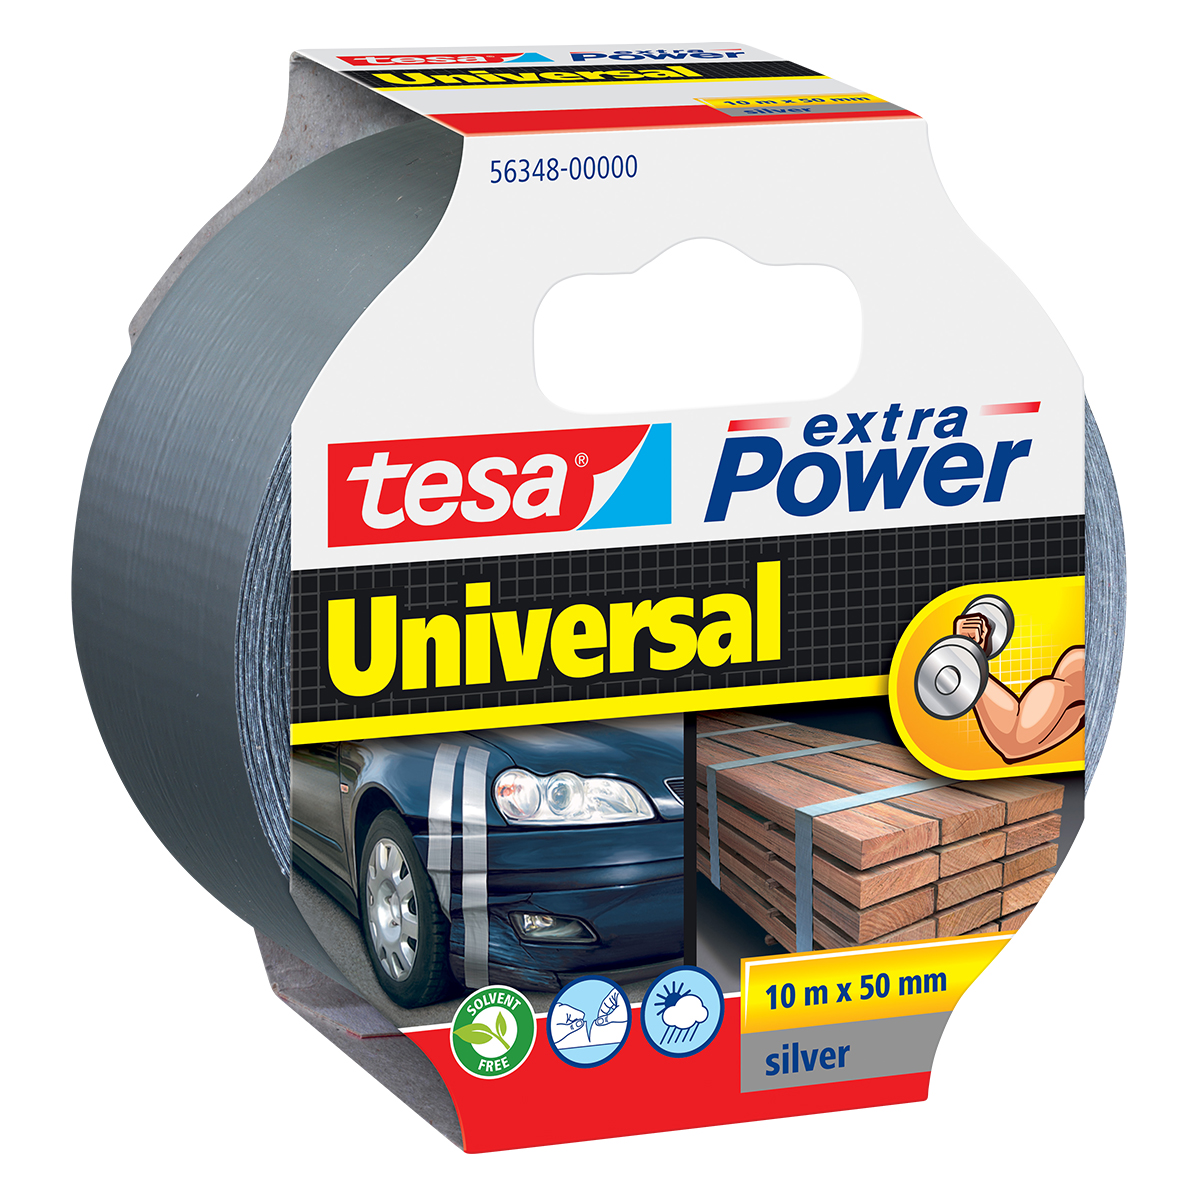 tesa extra Power Universal duct tape Silver 10m x 50 mm